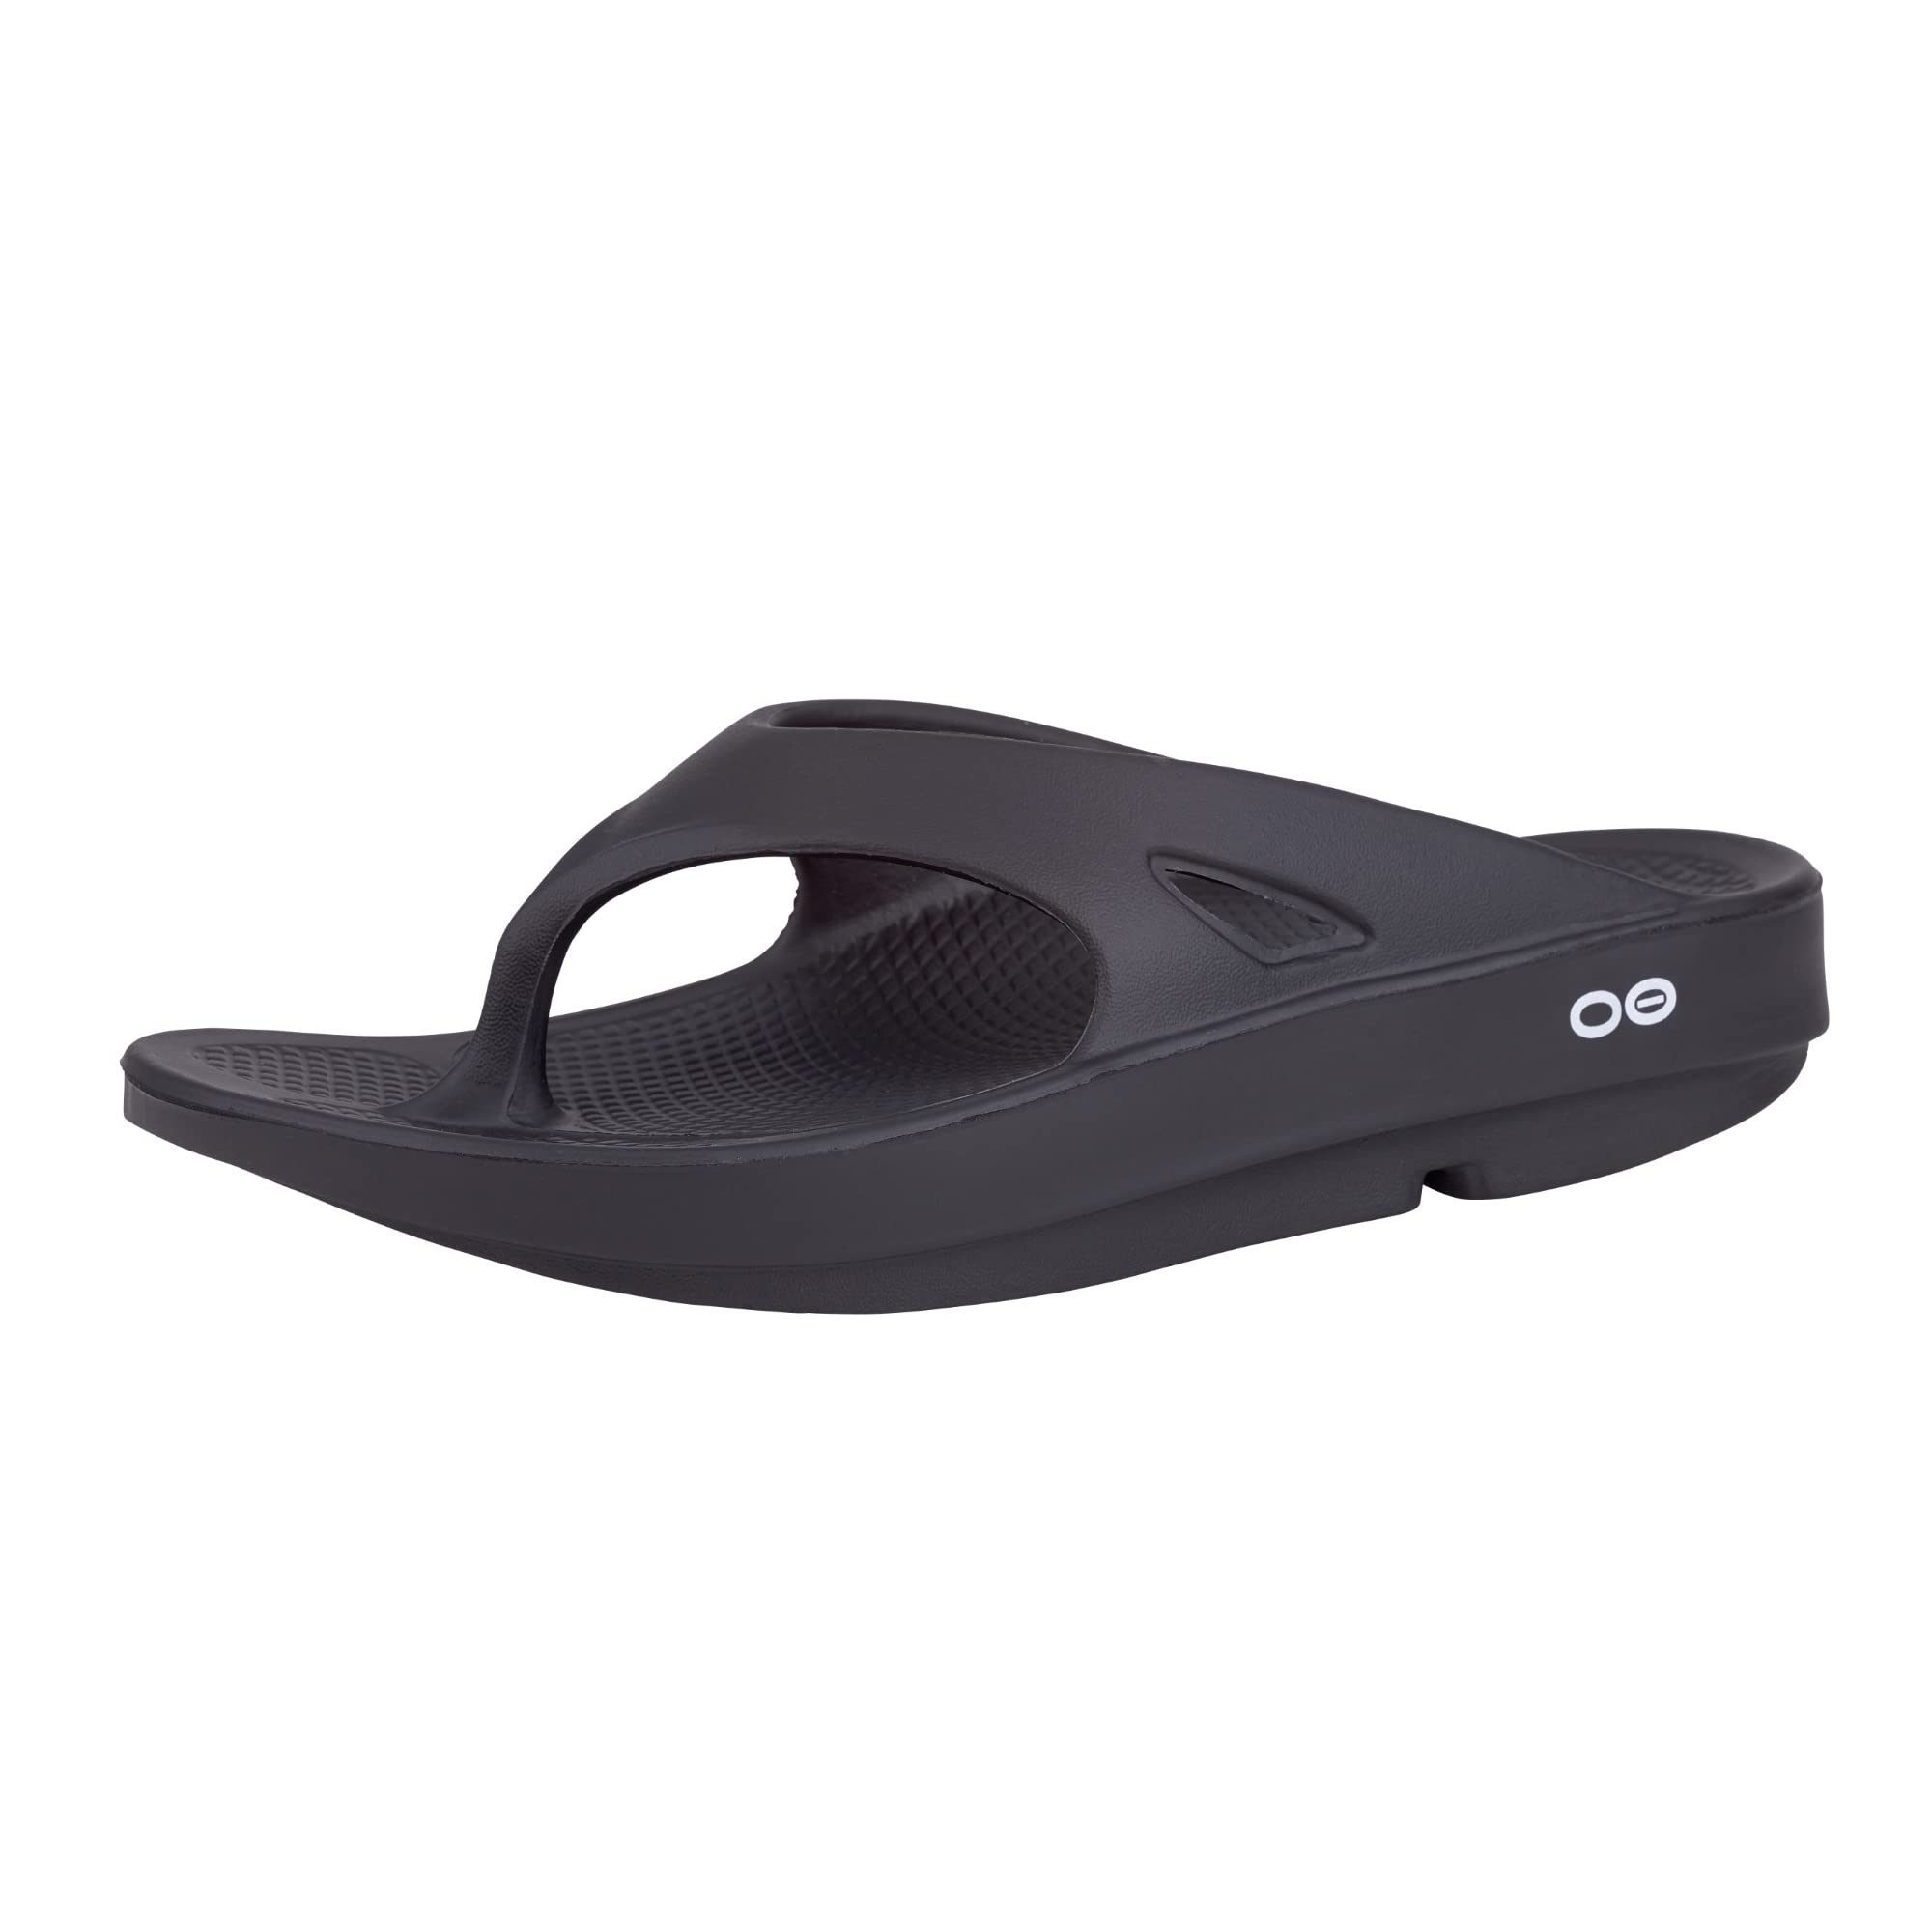 OOFOS - Unisex OOriginal - Post Run Sports Recovery Thong Sandal